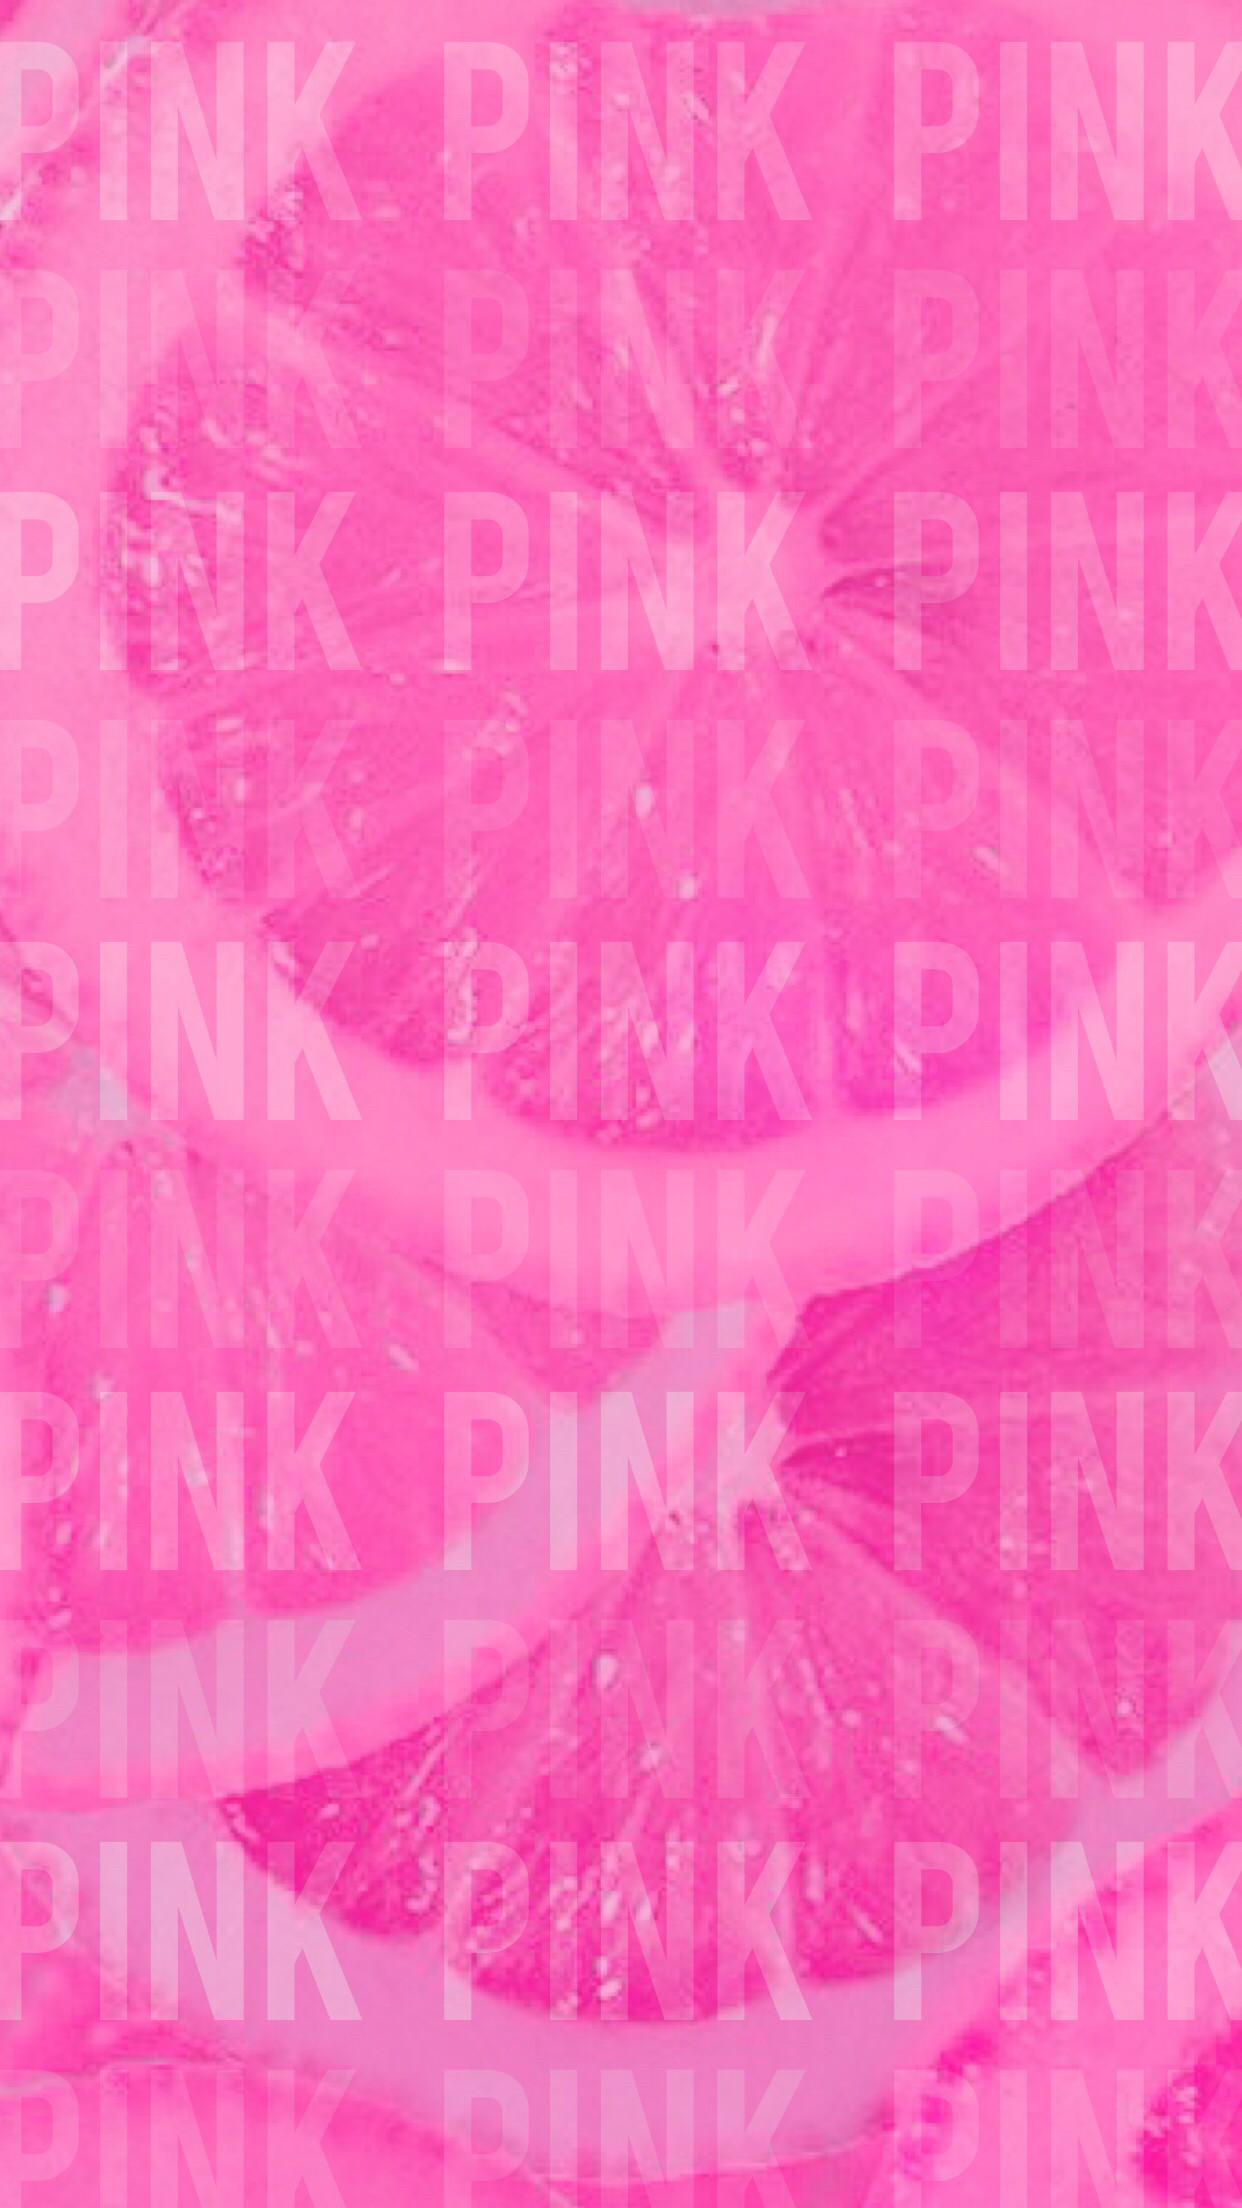 Victorias Secret PINK  PINK Your phone with allnew wallpapers  httpspinknationcomPhoneGoodies  Facebook